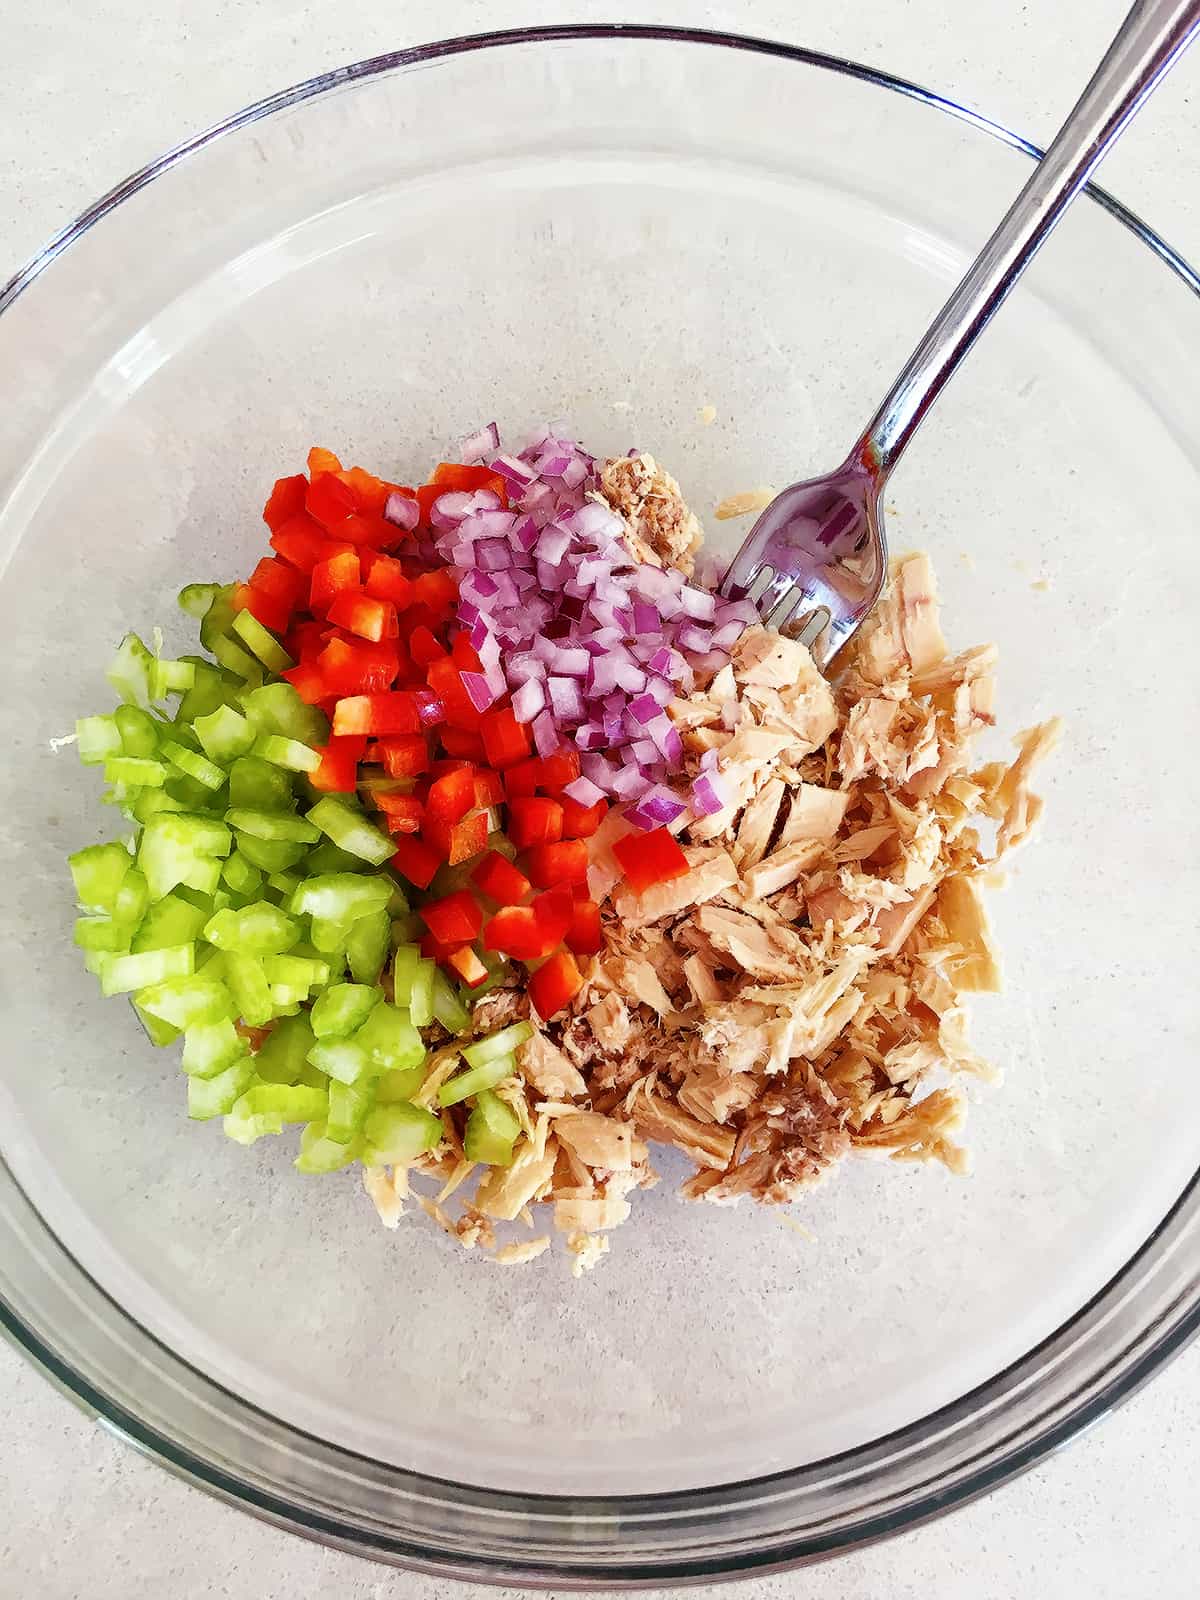 Freshly chopped vegetables and tuna in a glass mixing bowl.